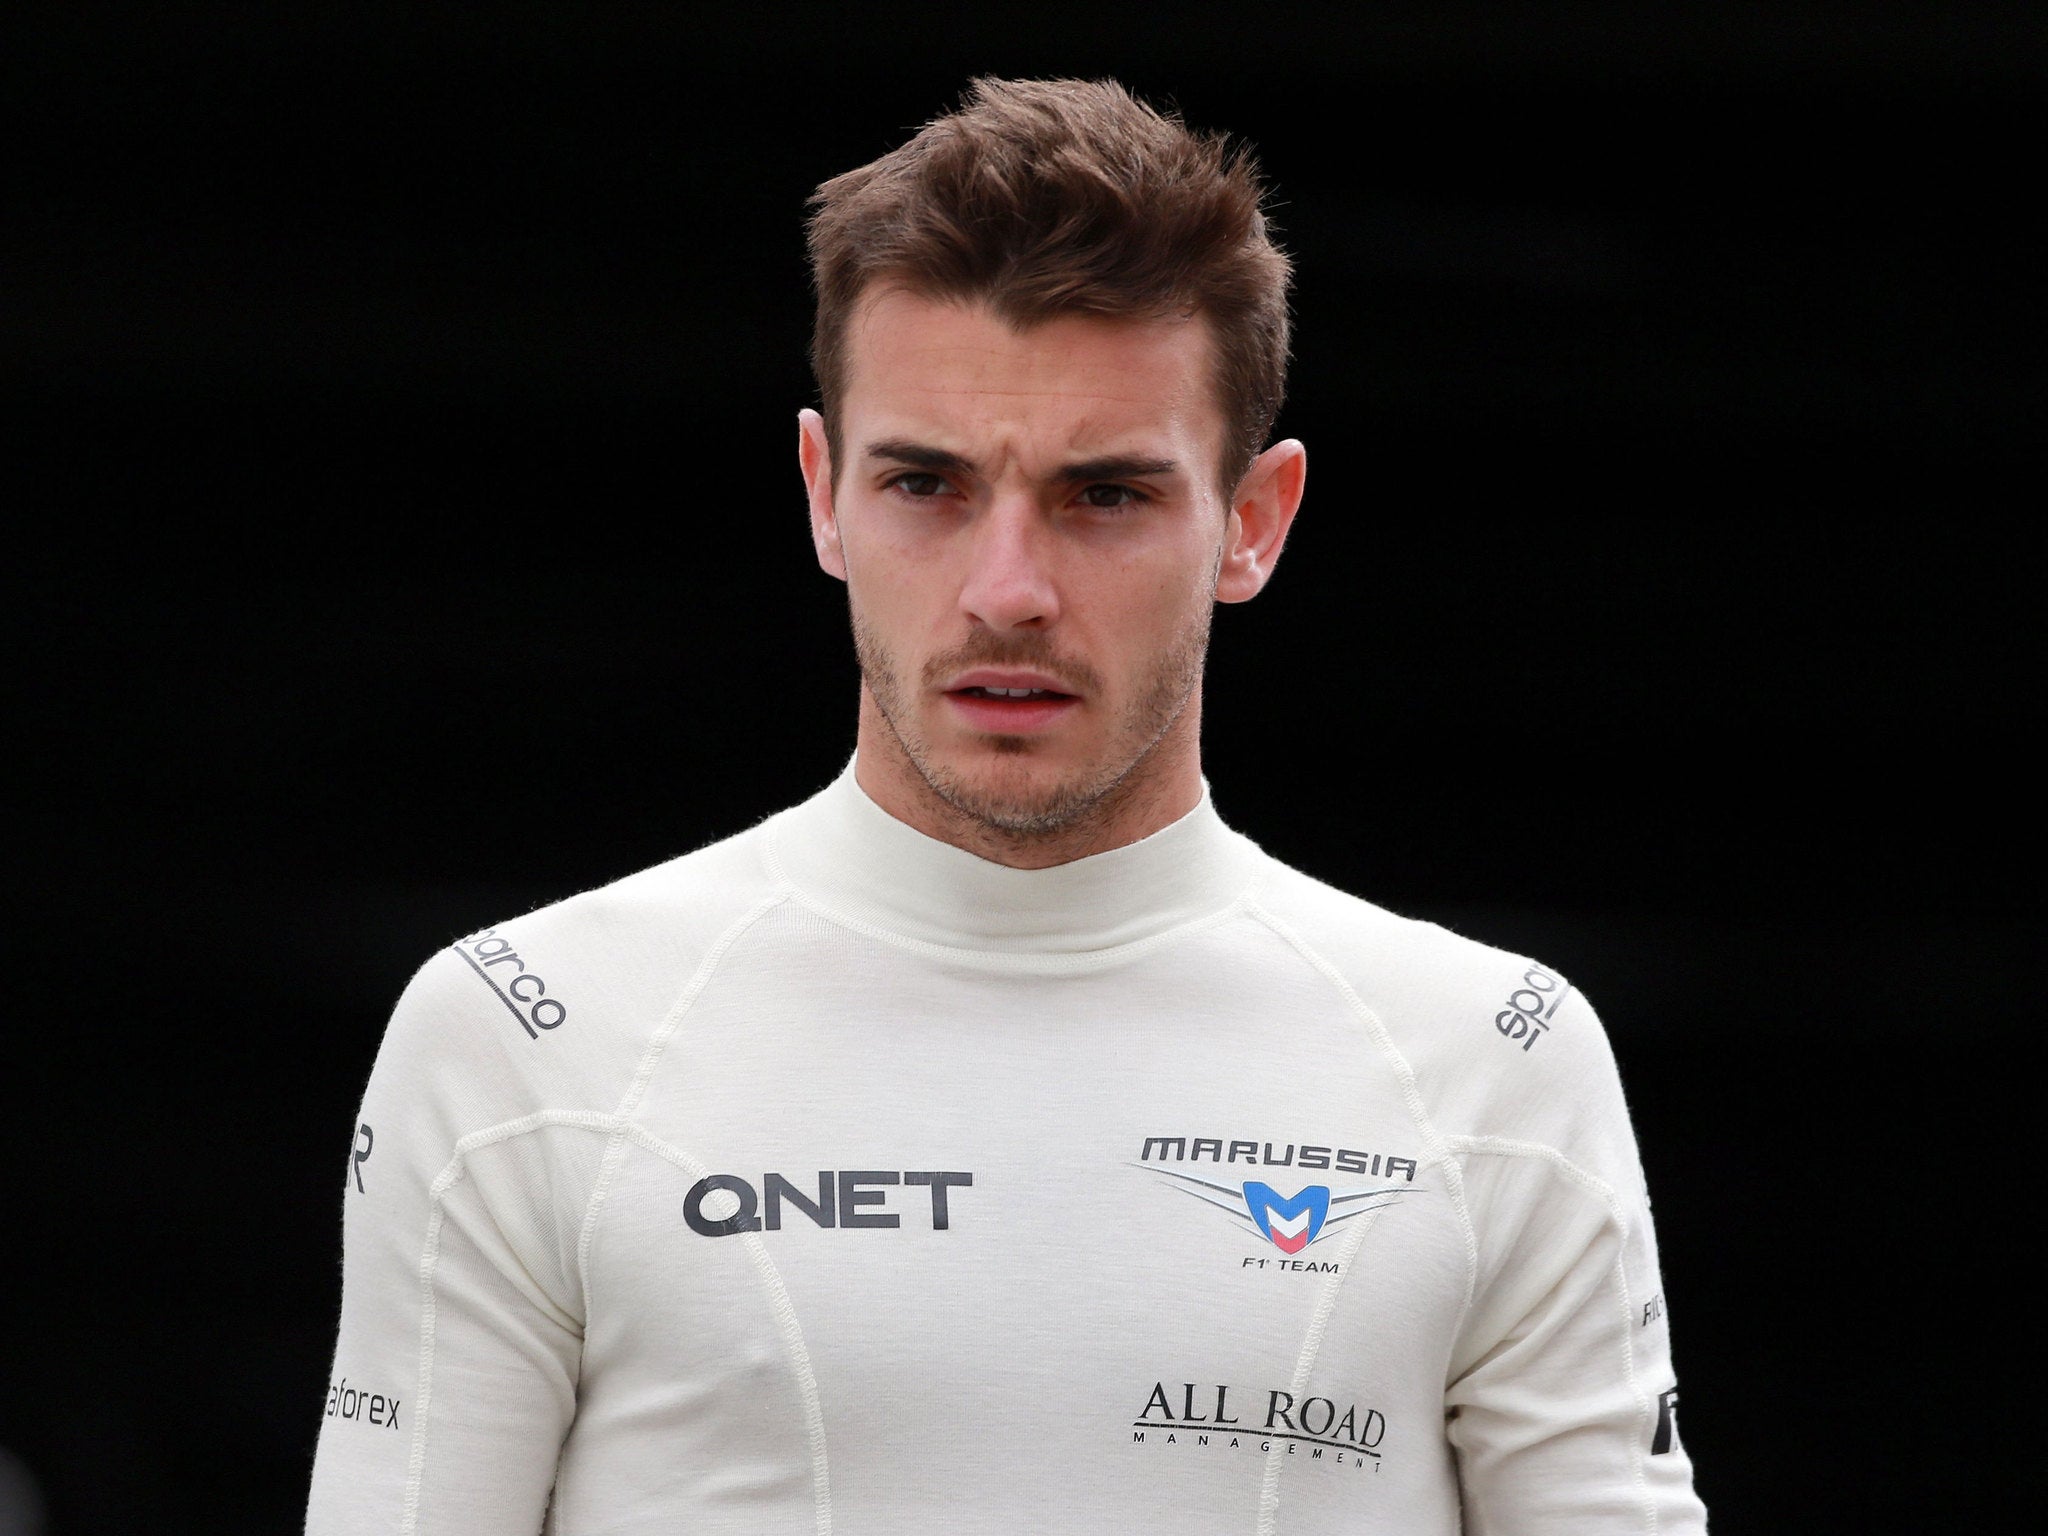 Marussia driver Jules Bianchi was taken to hospital unconscious following a crash at the Japanese Grand Prix